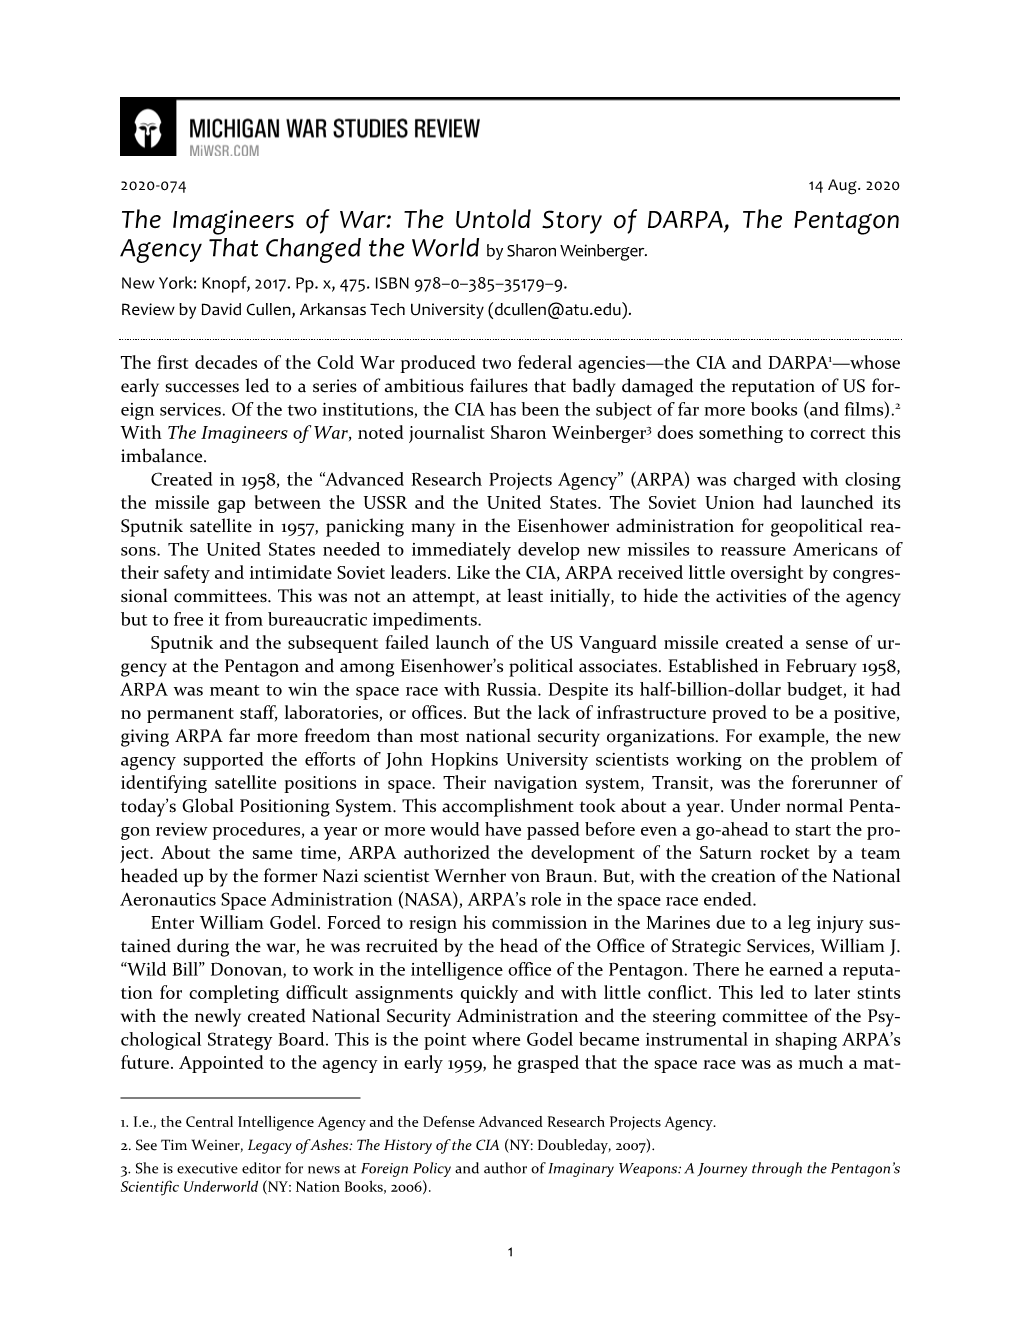 The Untold Story of DARPA, the Pentagon Agency That Changed the World by Sharon Weinberger